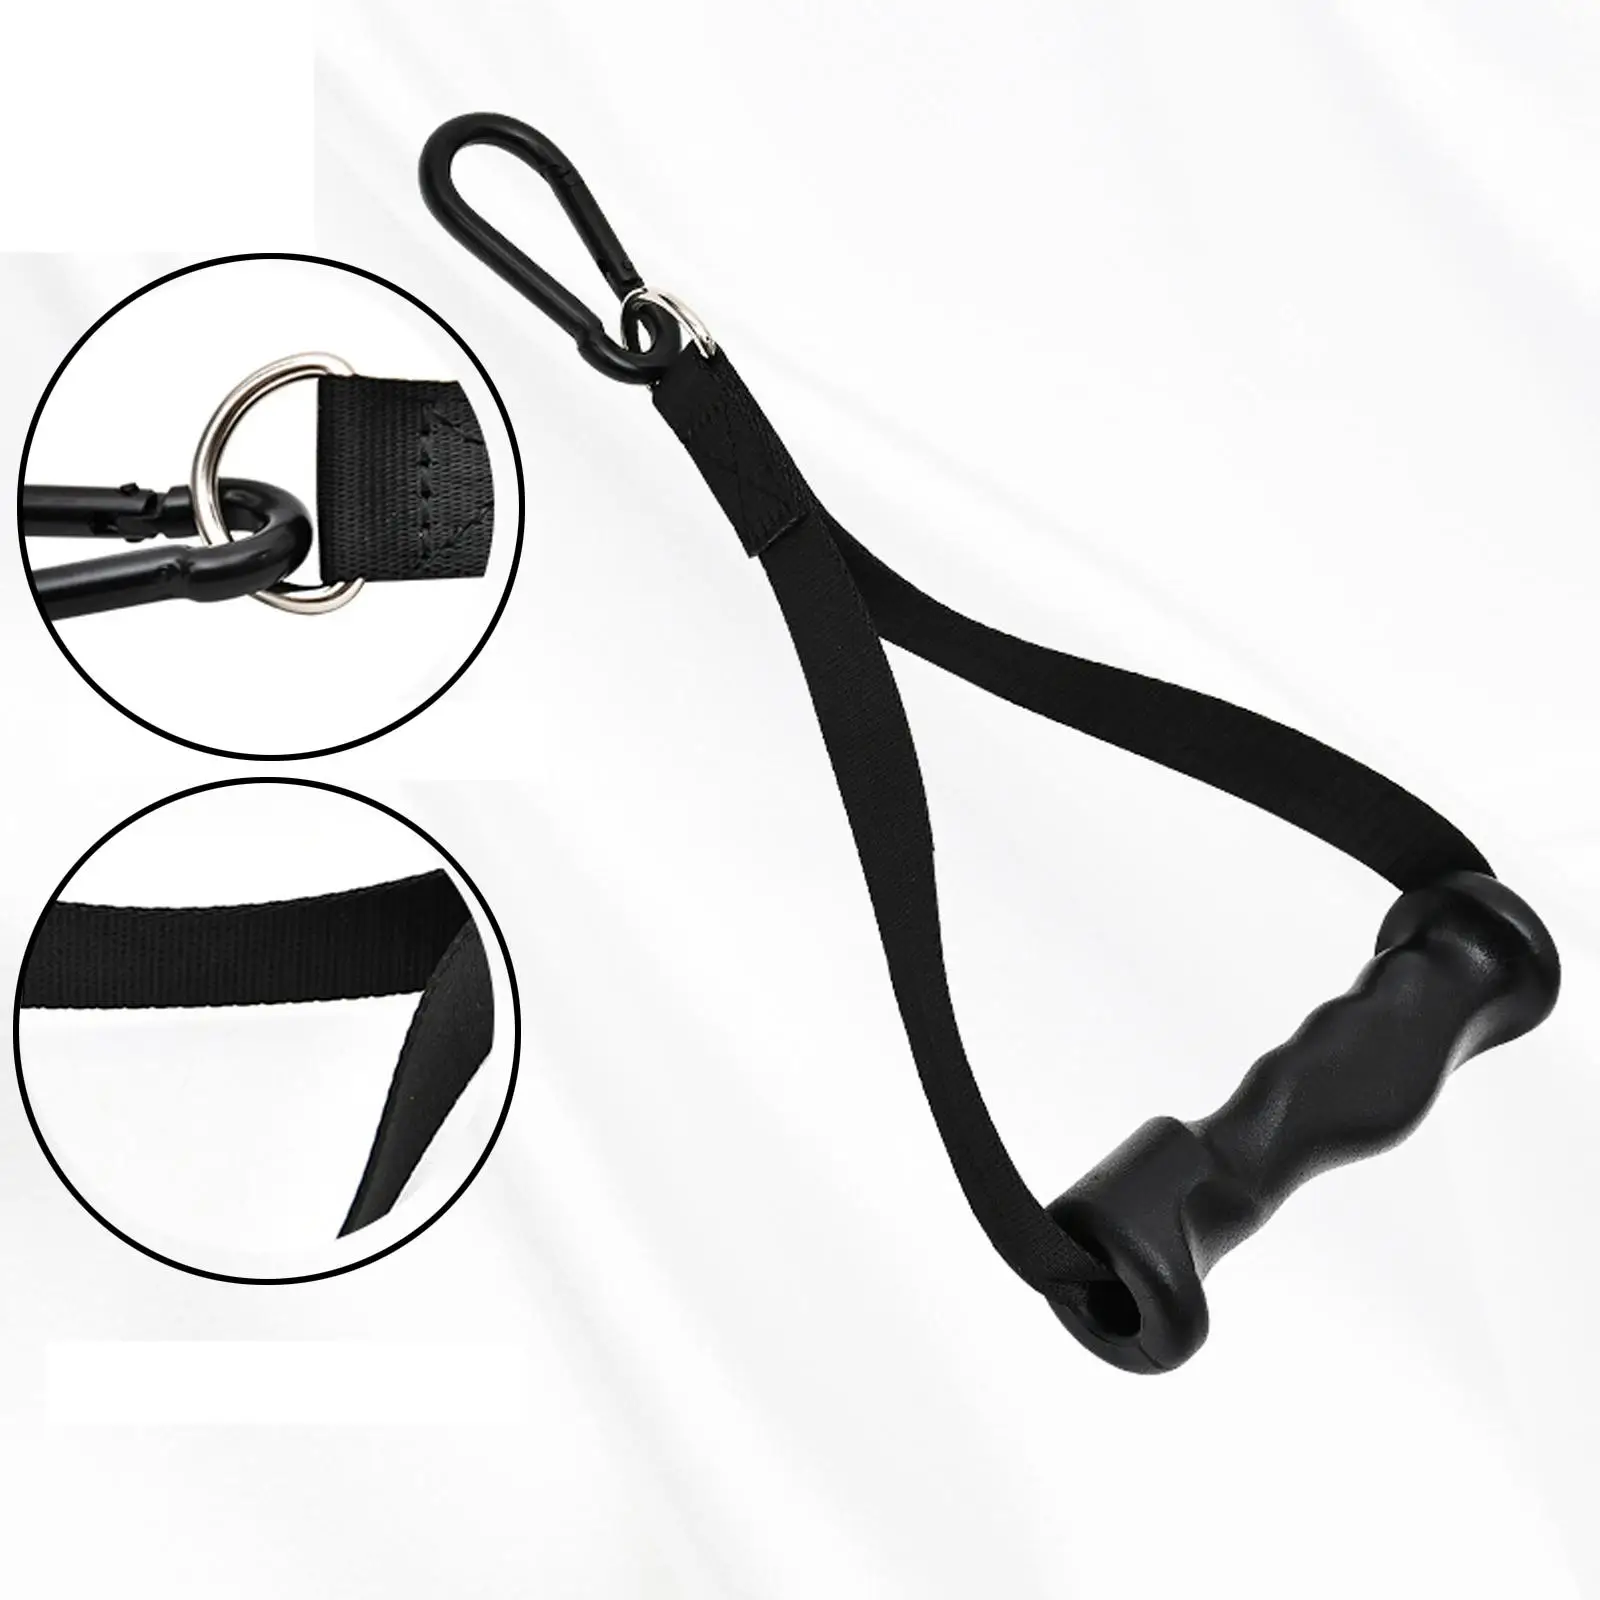 2 Pieces Resistance Exercise Gym Handles Gym Black for Strength Training Resistance Training Gymnastics Hanging